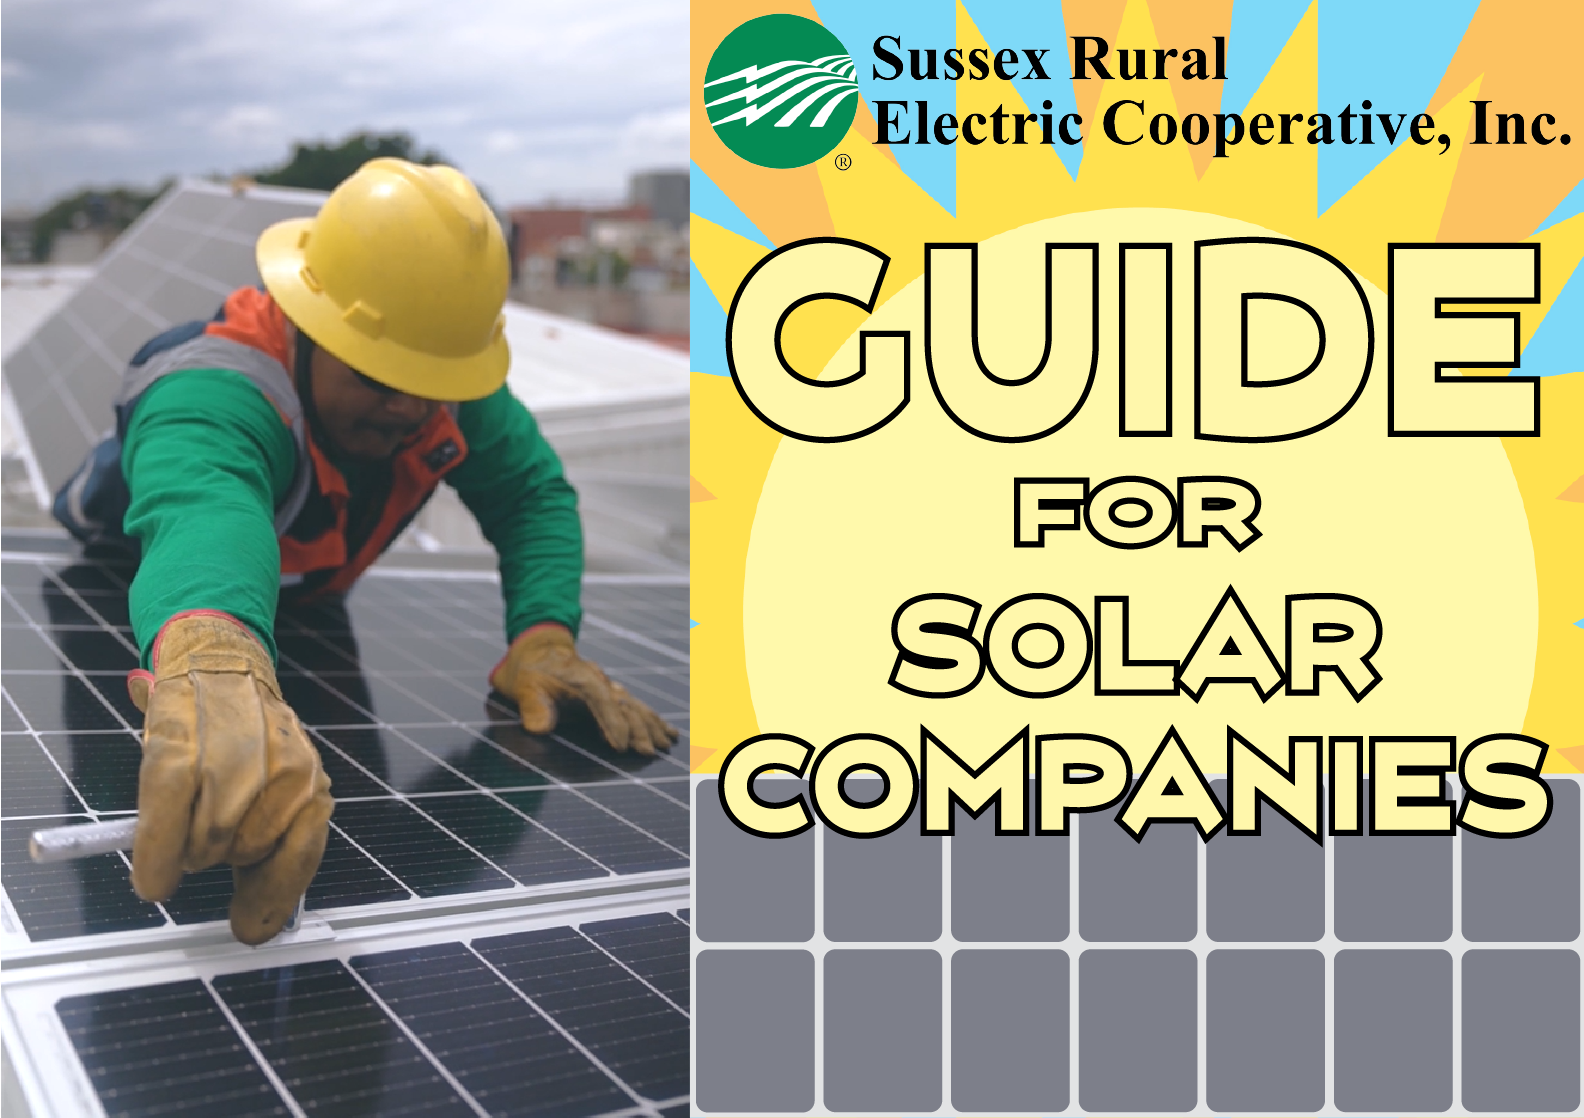 Sussex Rural Electric Cooperative, Inc. GUIDE FOR SOLAR COMPANIES.